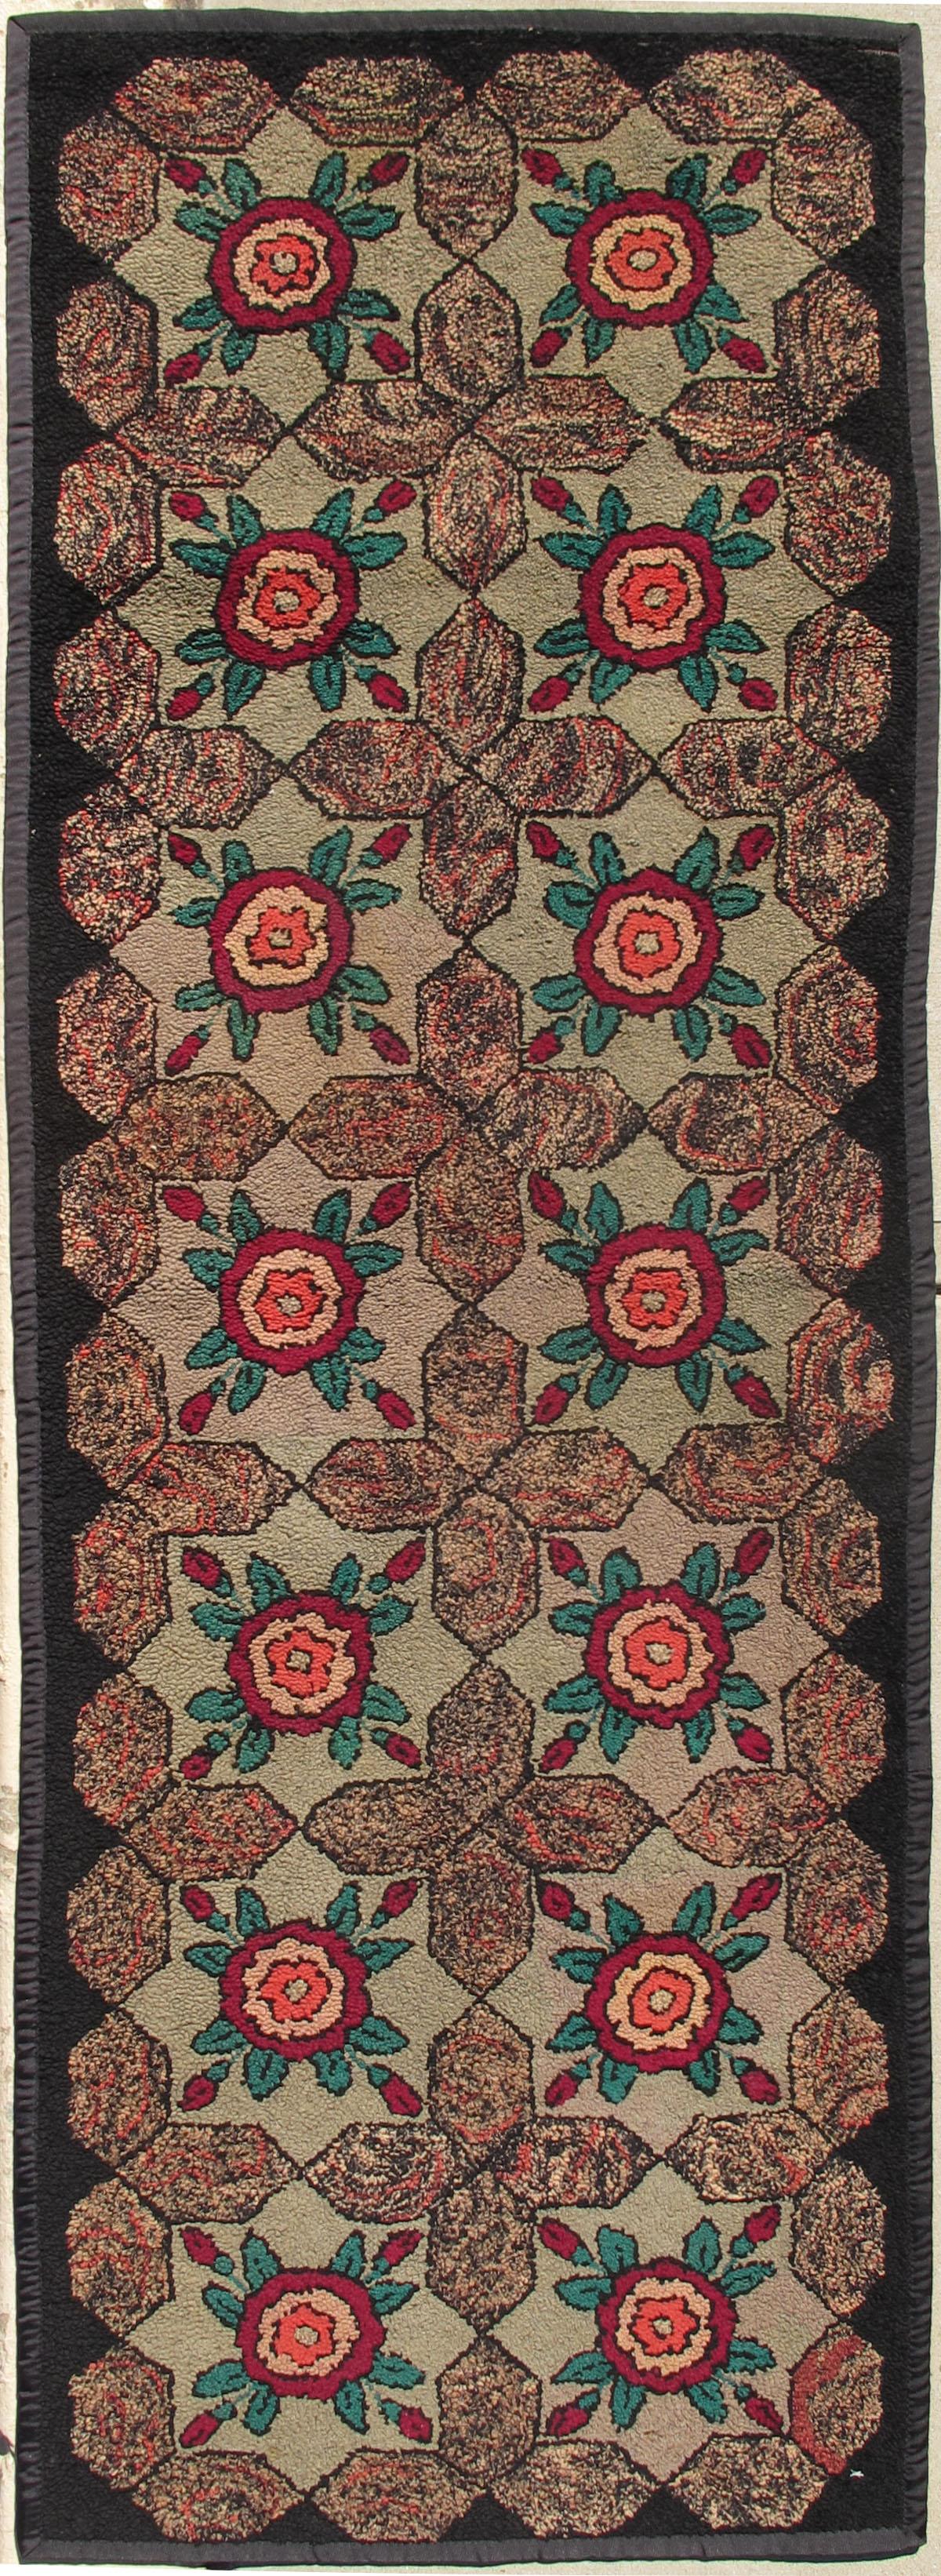 Repeating Floral-Leaf Design American Hooked Rug in Brown, Green, and Red For Sale 2